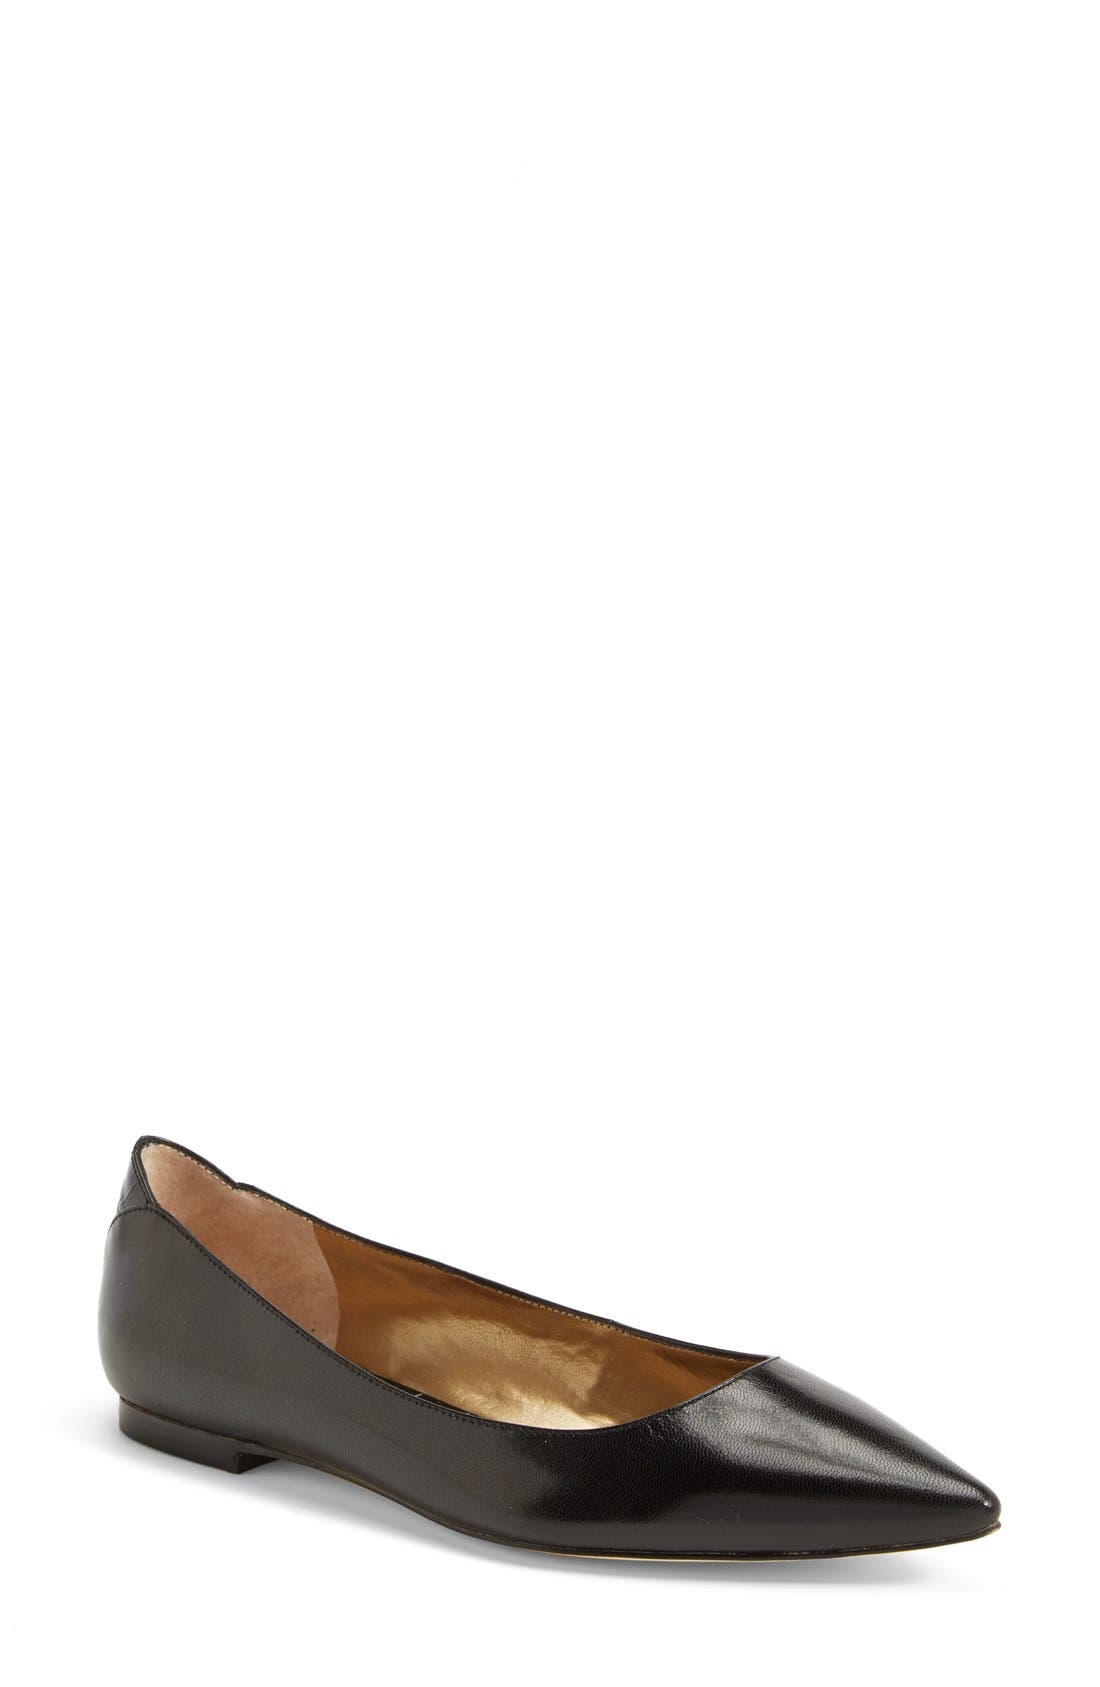 pointed toe flats wide width